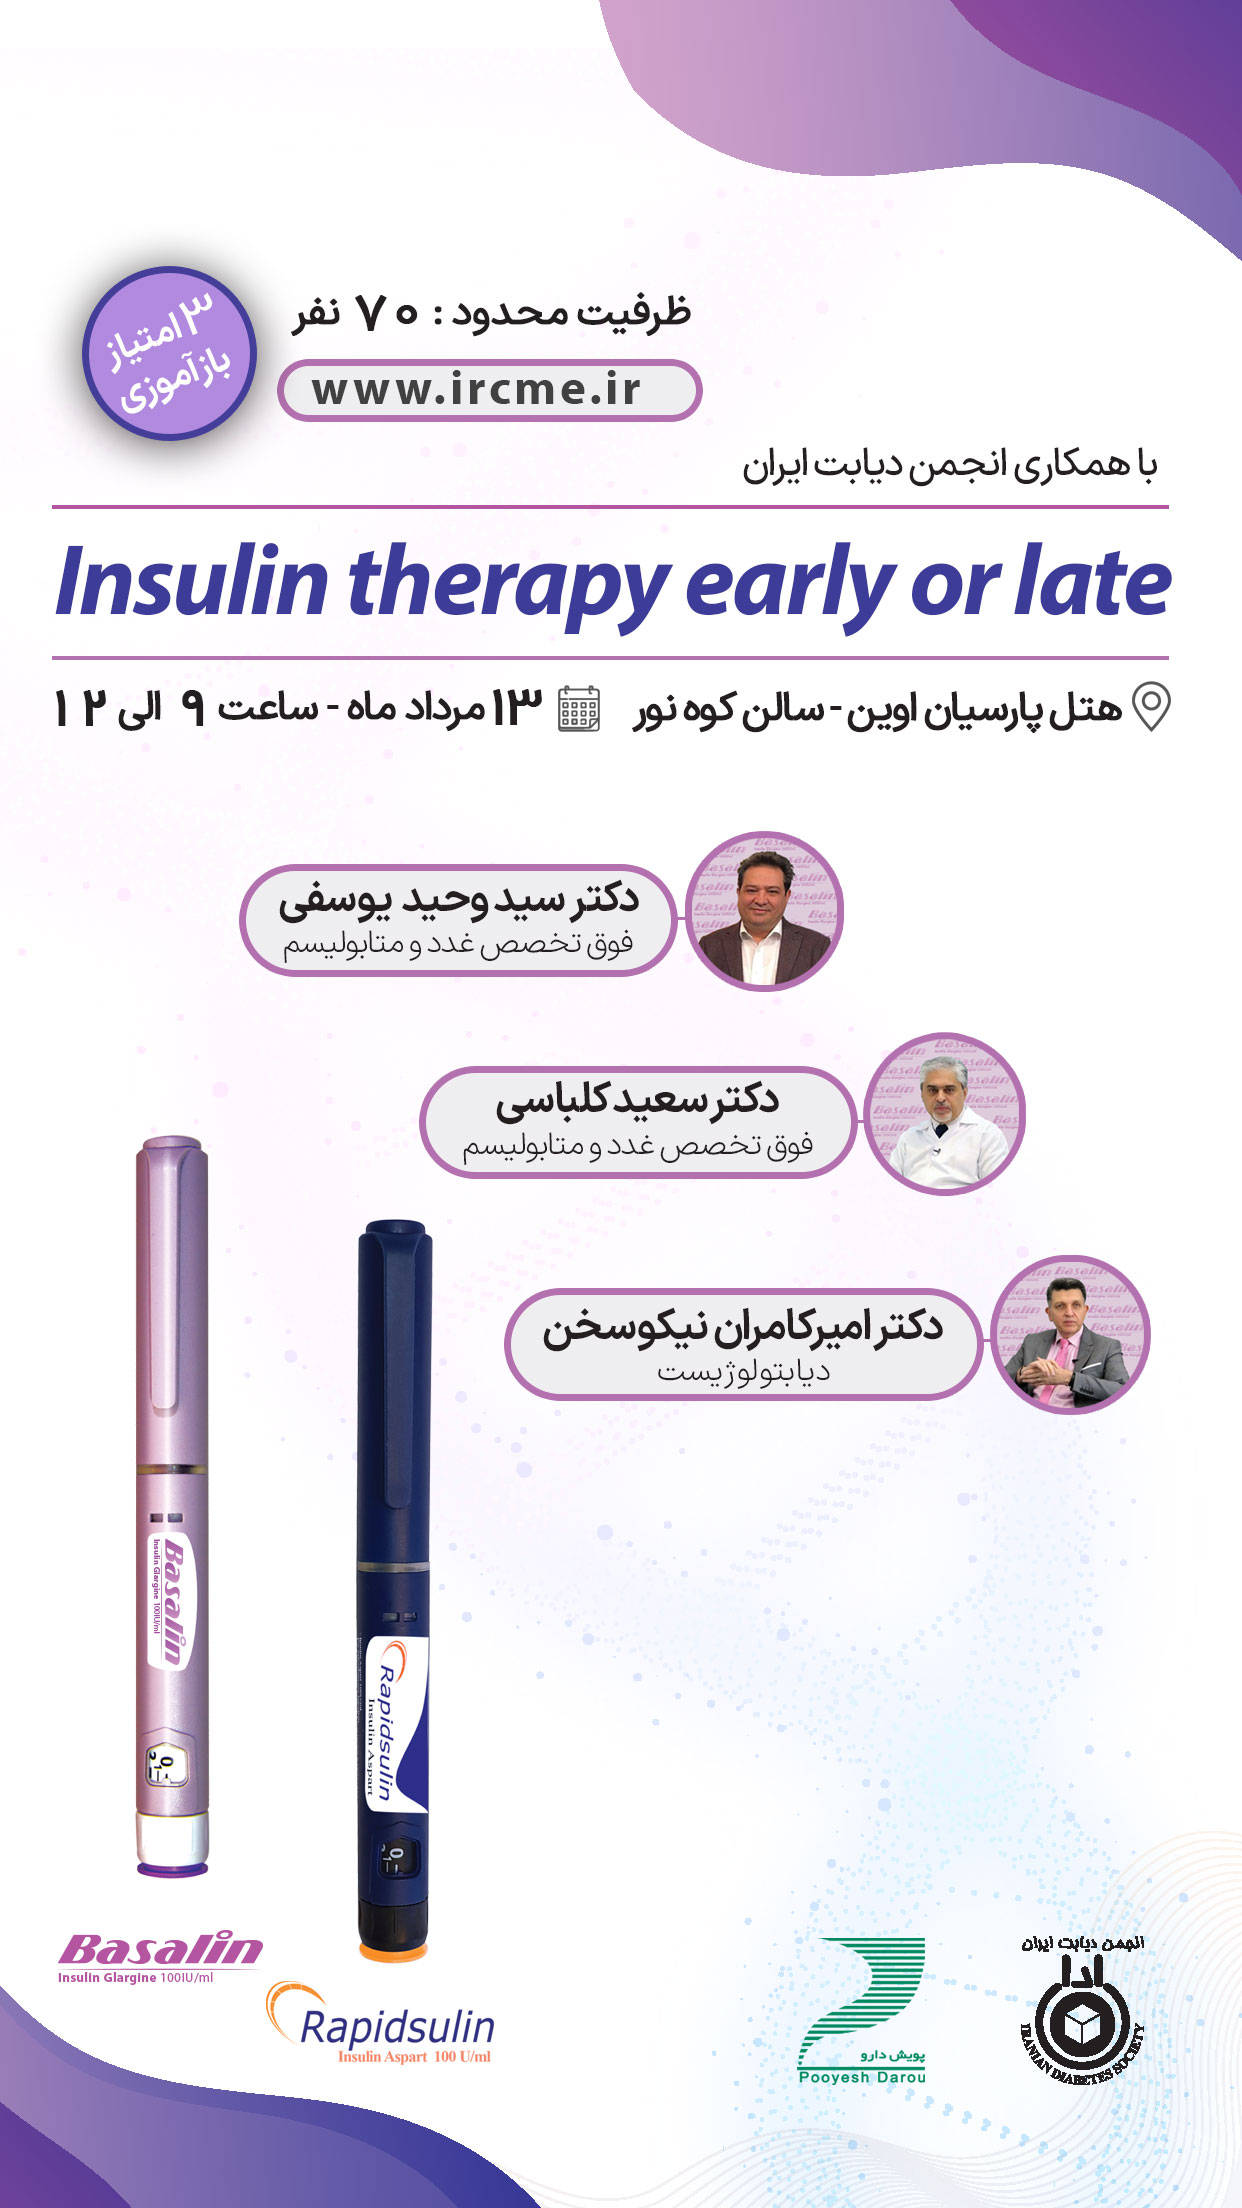 Insulin therapy early or late